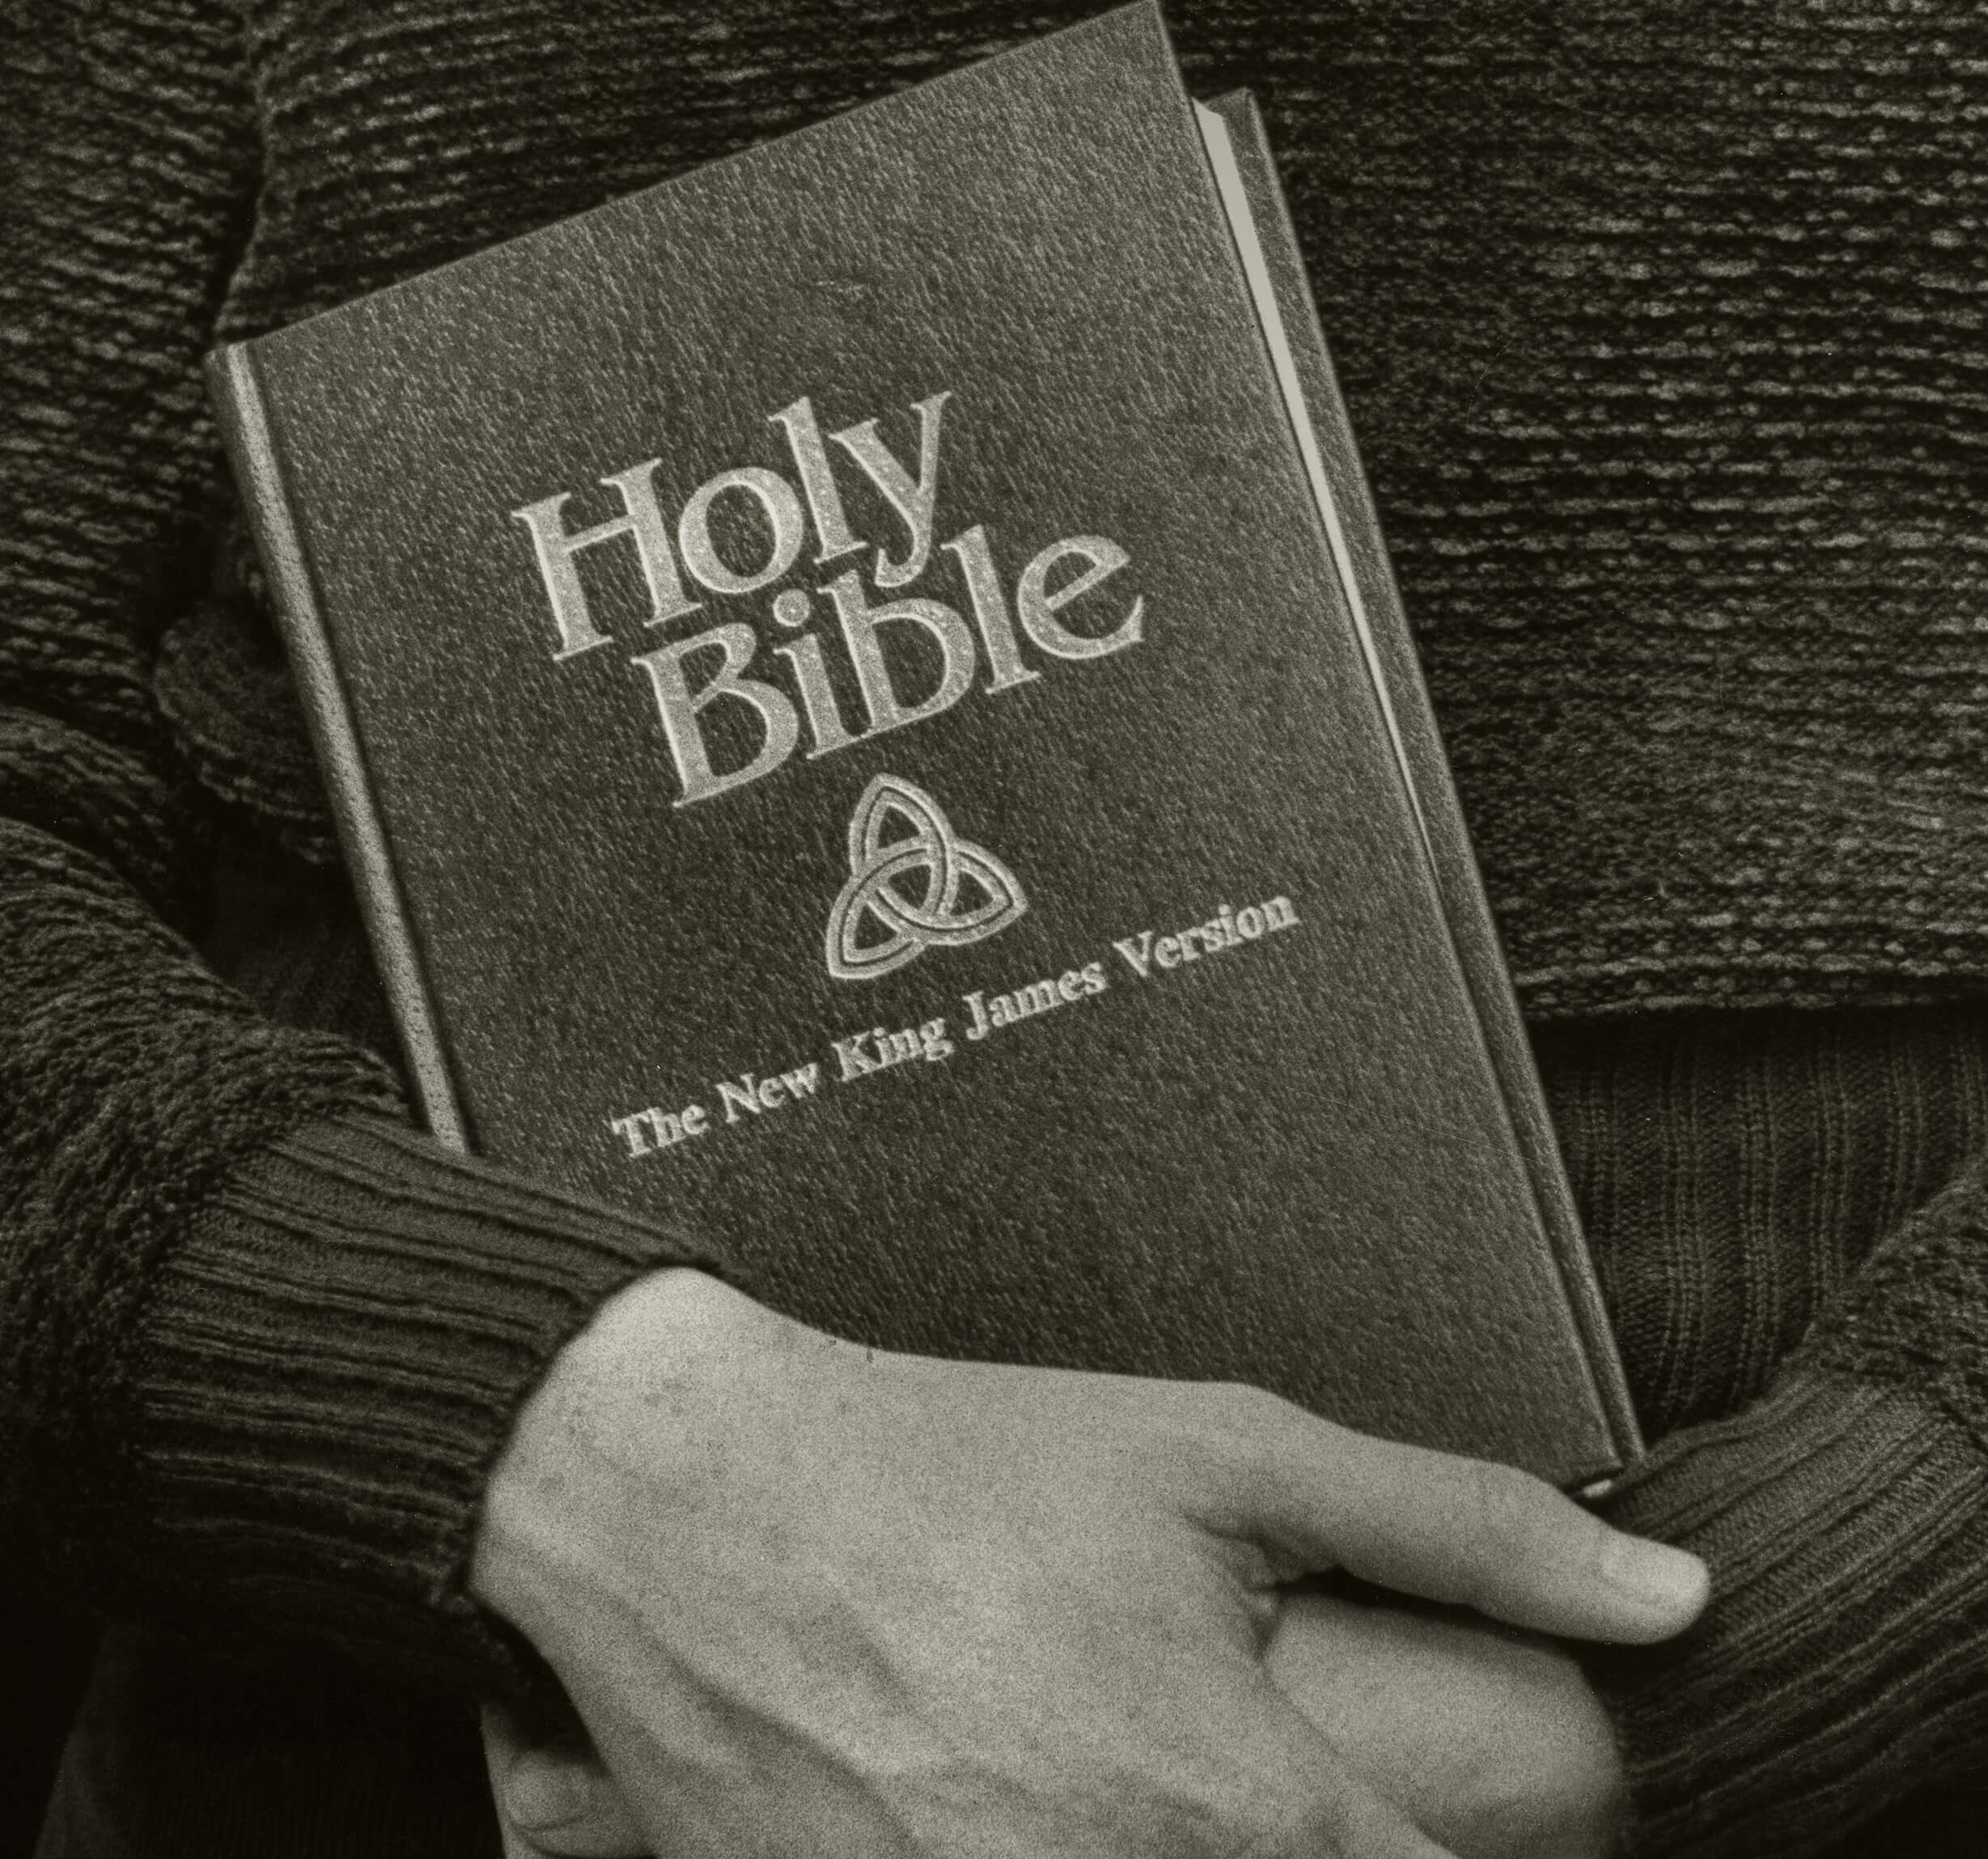 The copy of the Bible in black-and-white